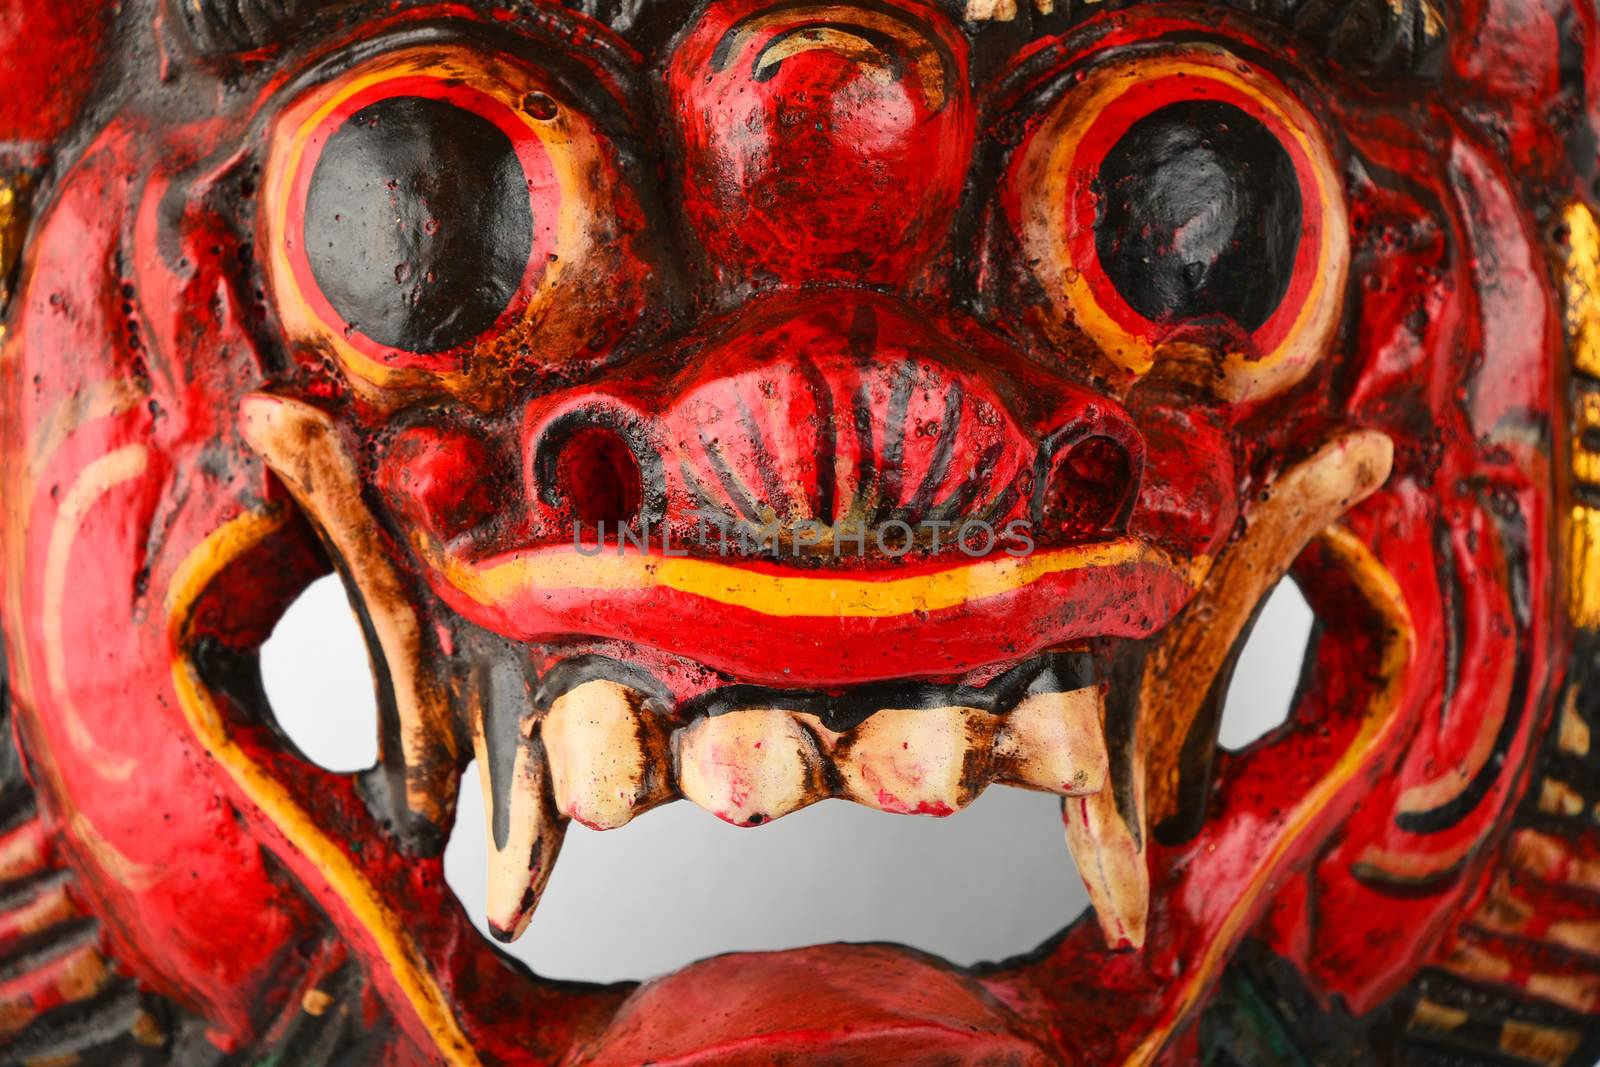 Asian traditional wooden red mask with face of human or demon painted with vivid red and blue, close up